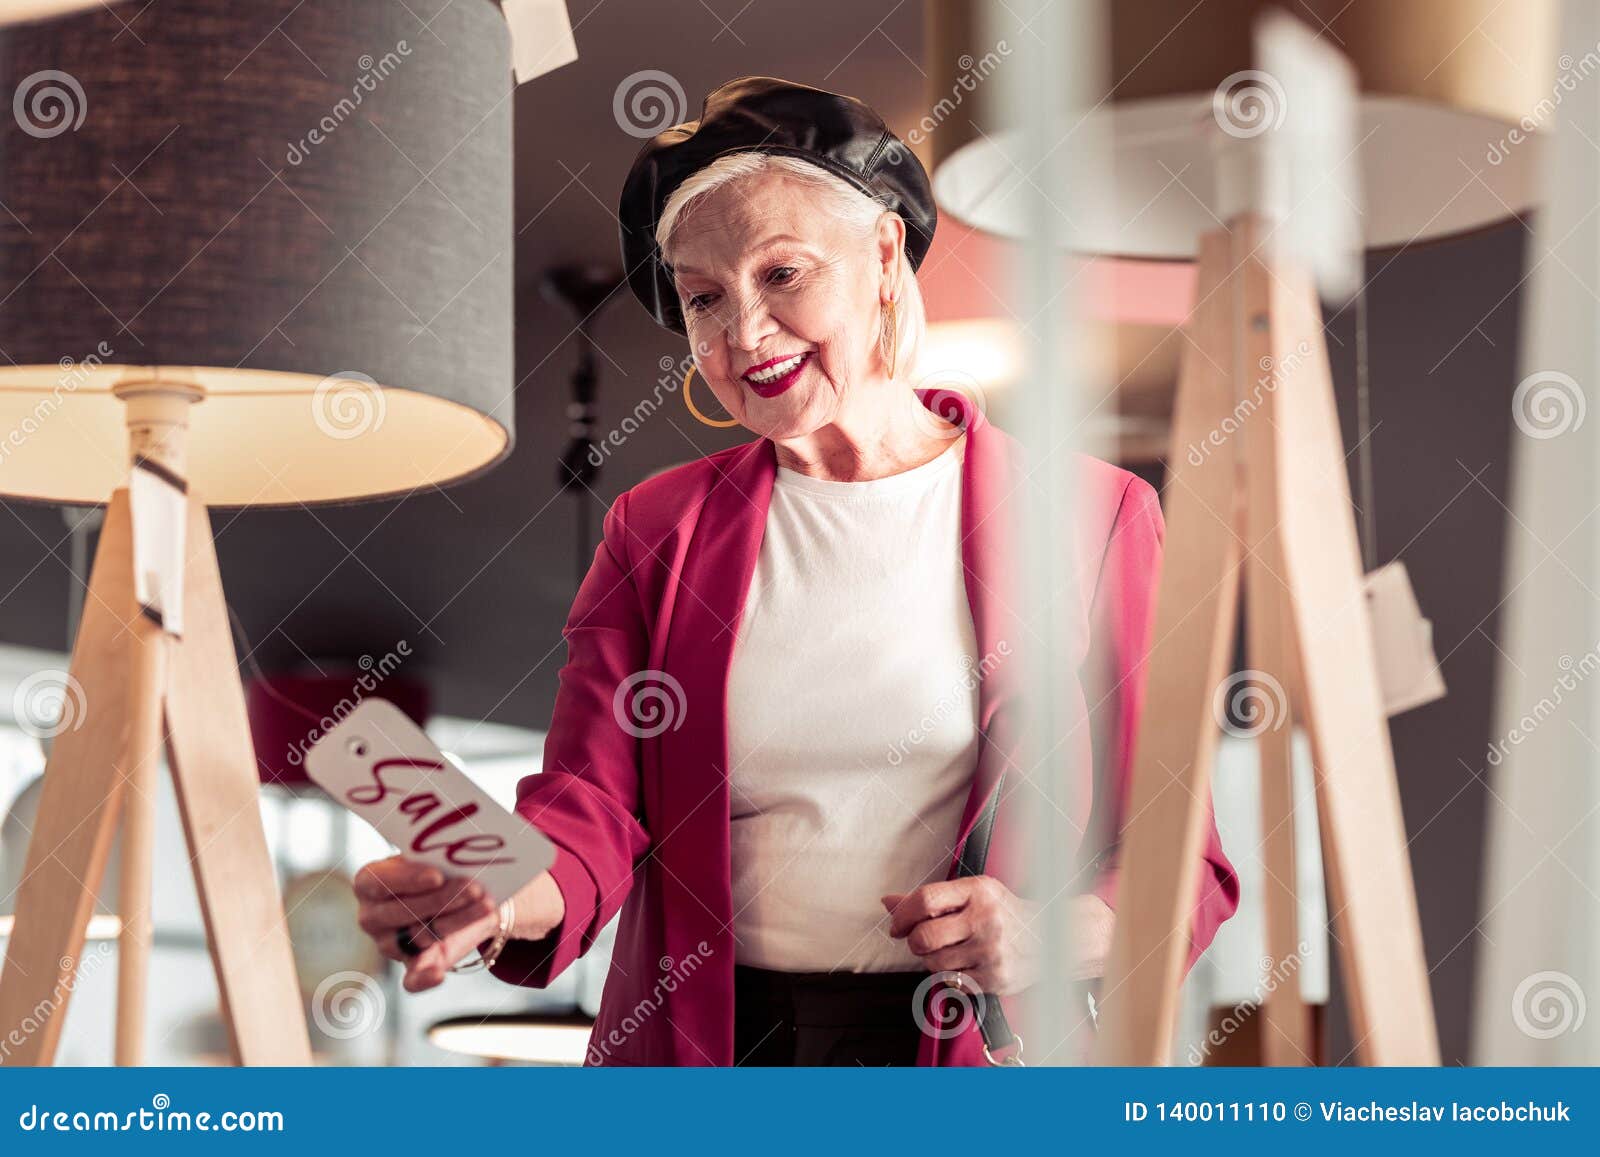 blue-rinsed charming elderly lady smilingly looking at sale sign